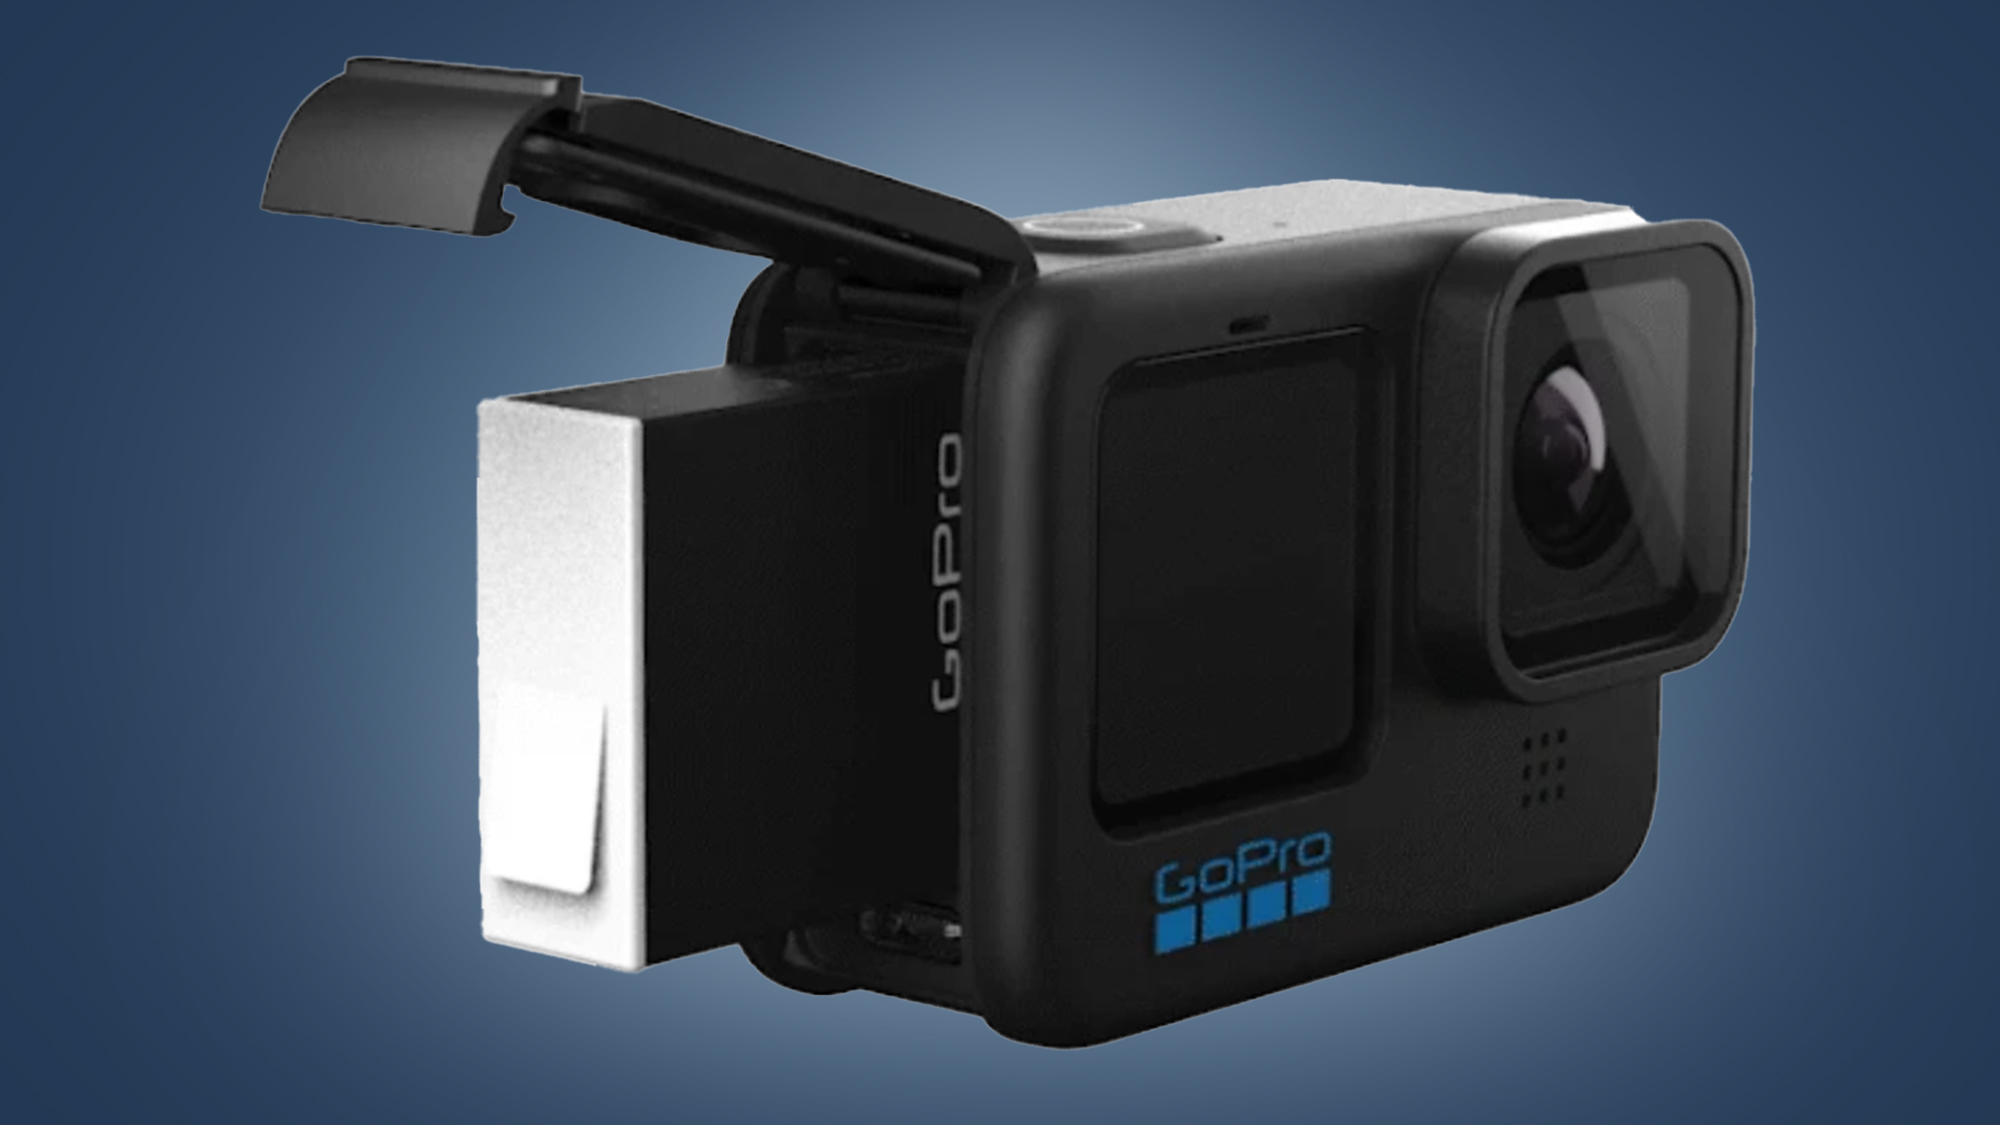 GoPro Enduro Battery In-Depth Review